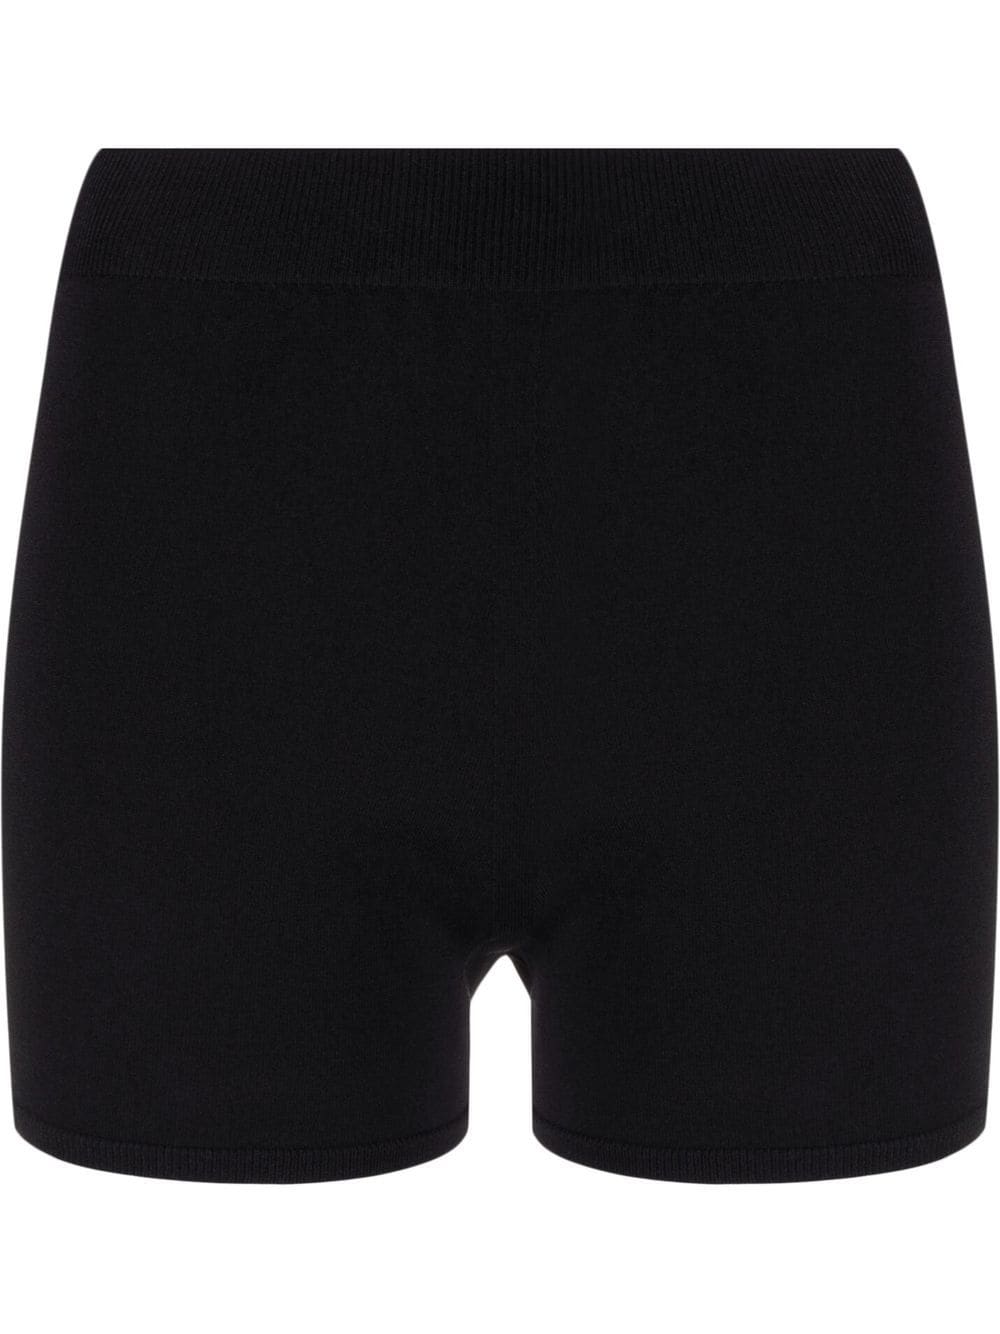 high-waist fitted shorts